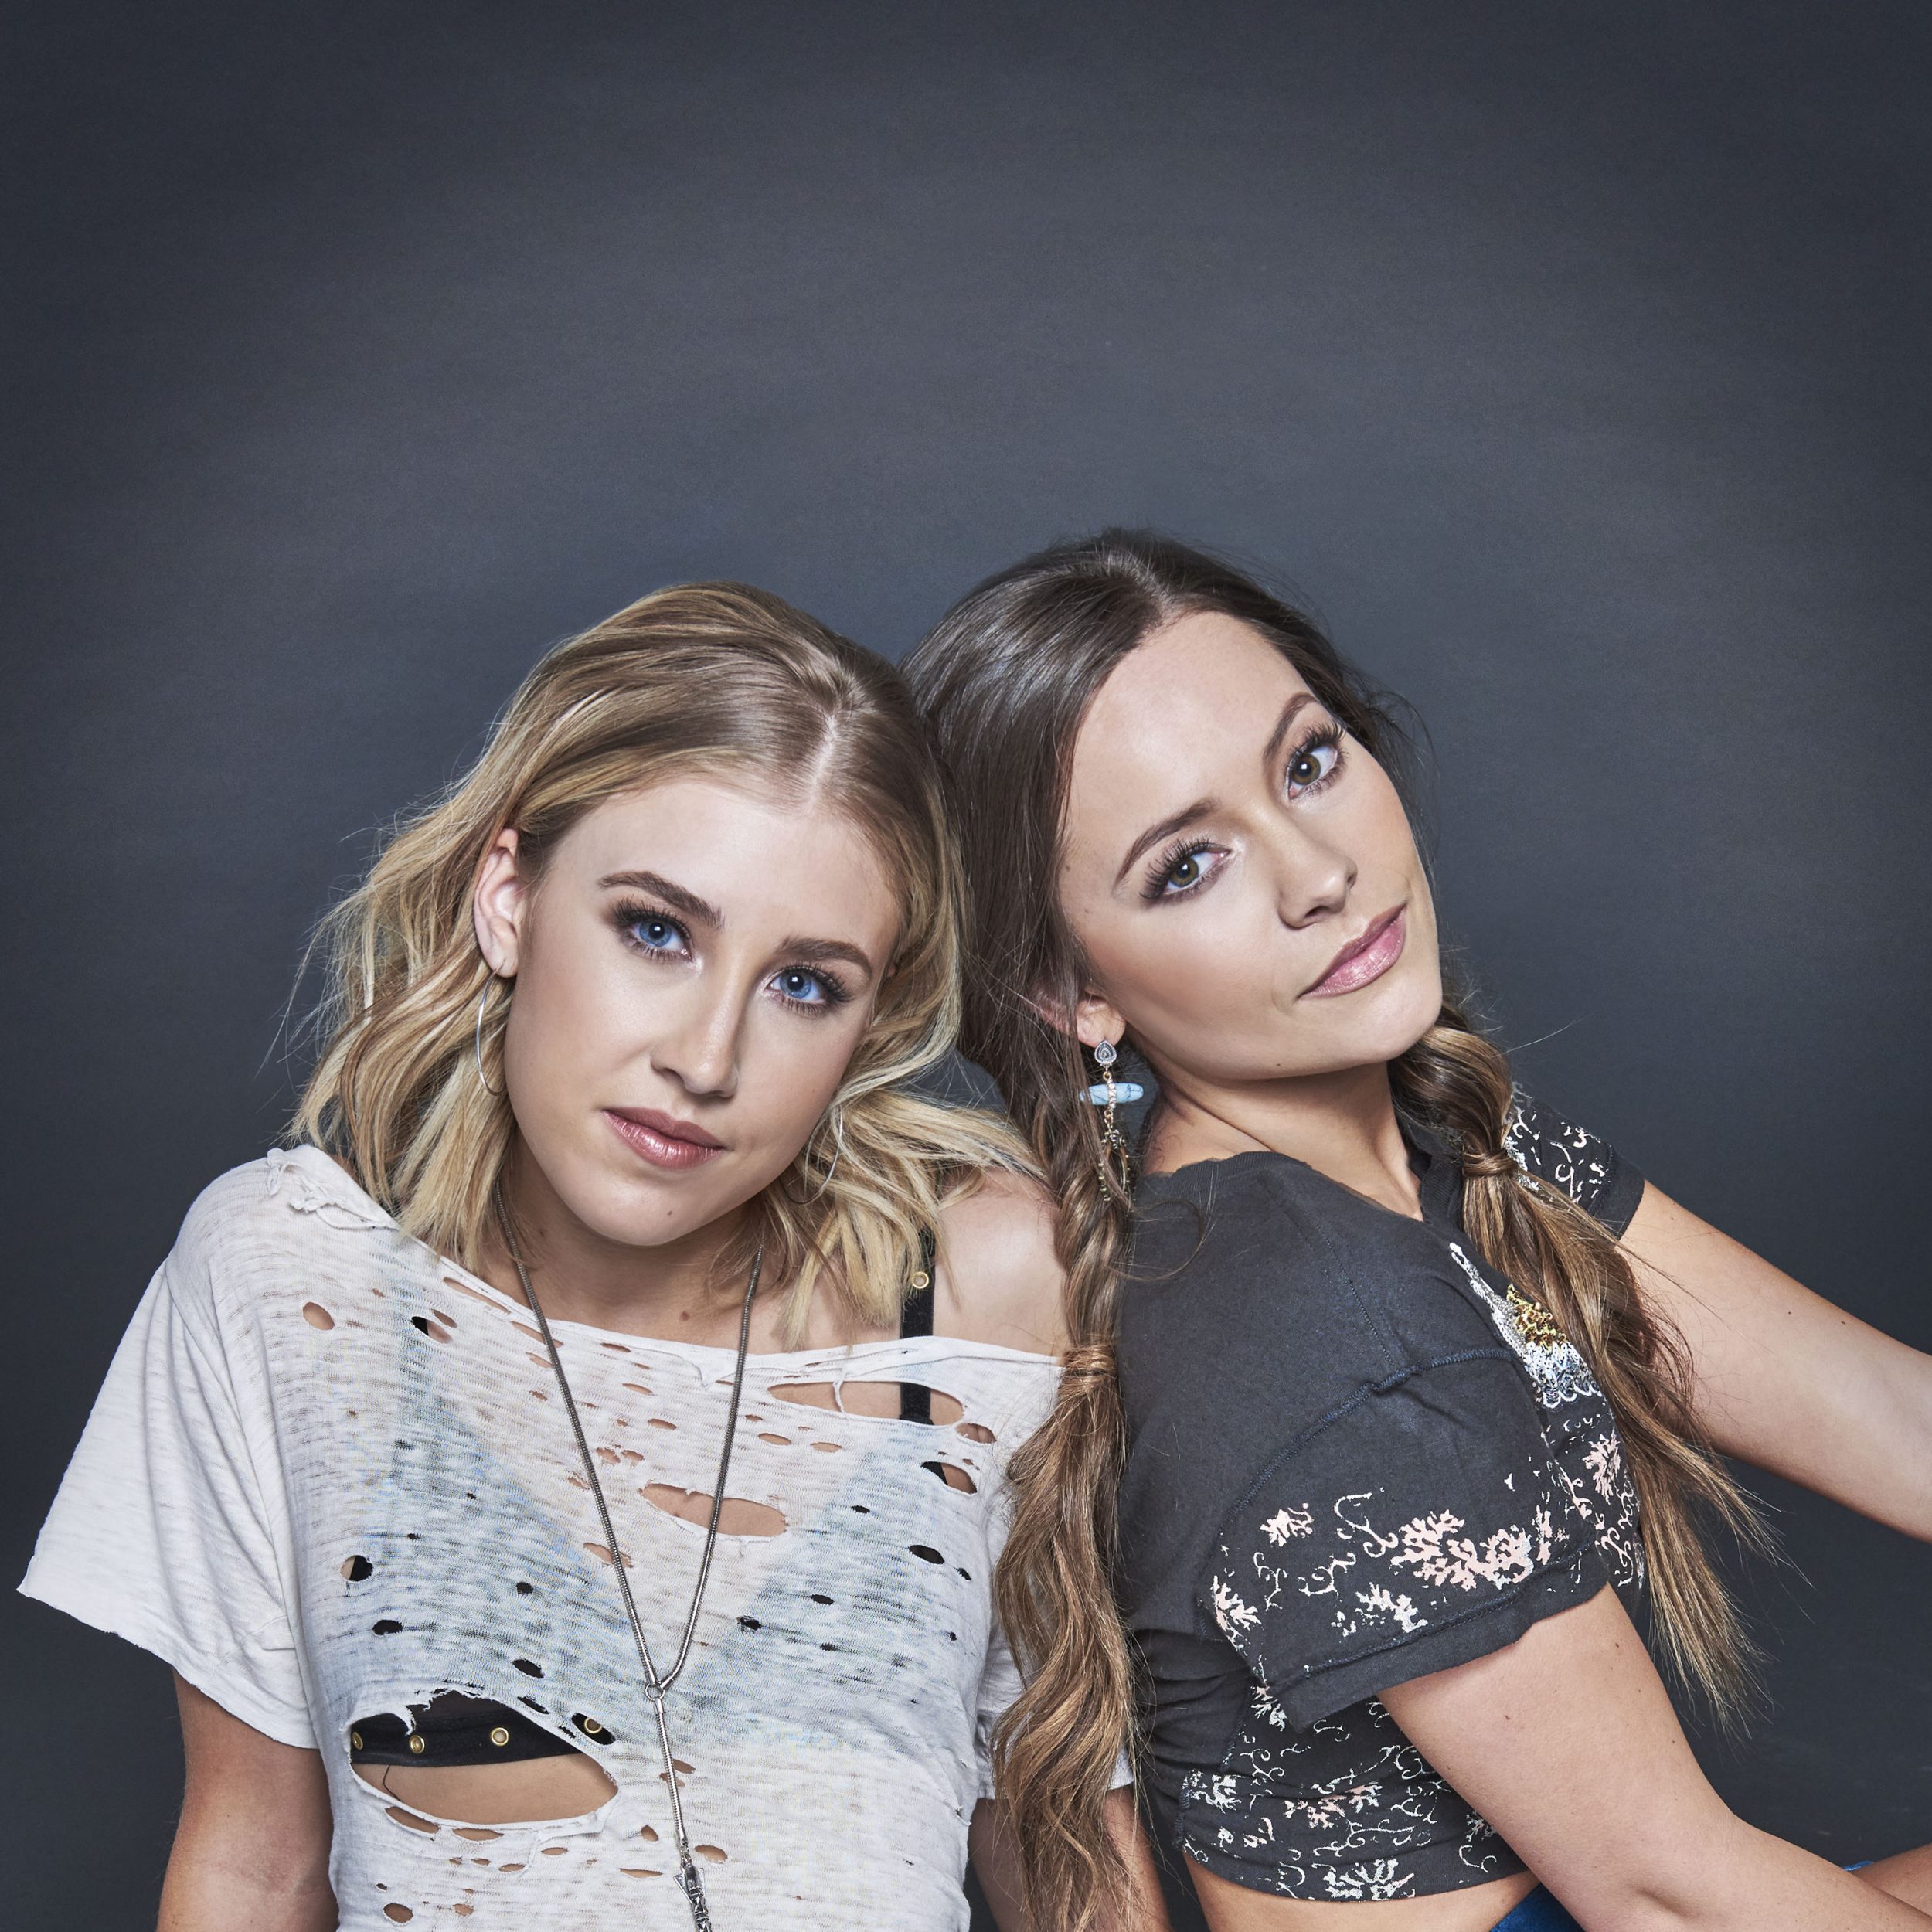 Maddie & Tae. Friends обложка. Альбом Мэдди. Maddie & Tae - girl in a Country Song. Dont friend